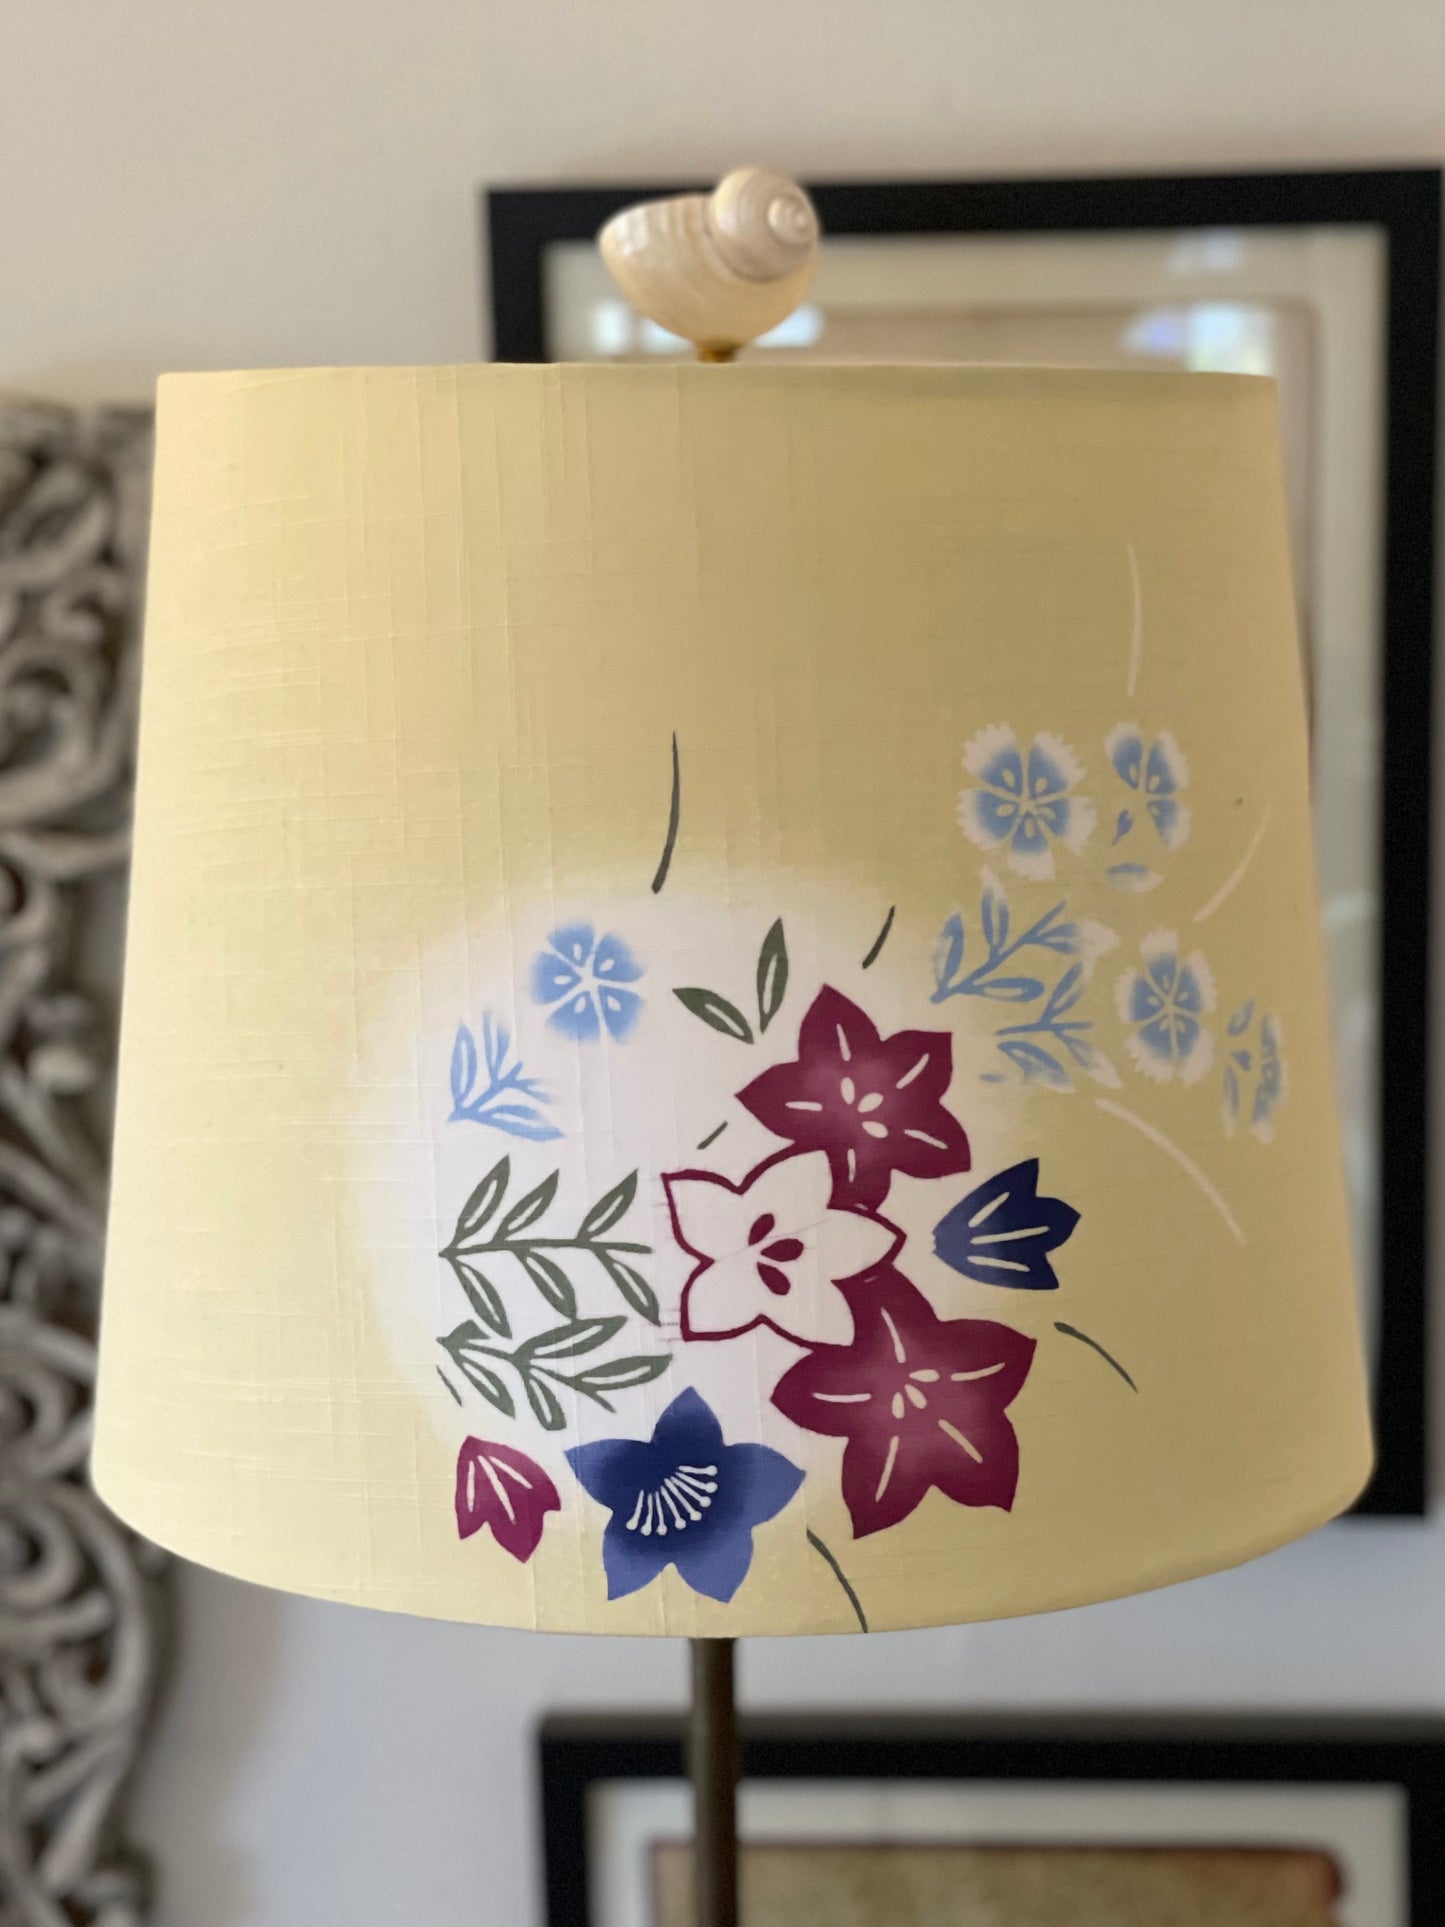 Medium Empire Lampshade. Vintage Summer Kimono "Yukata" Fabric from Japan. Pale Yellow with Pastel Blue, Maroon, and Navy Floral.